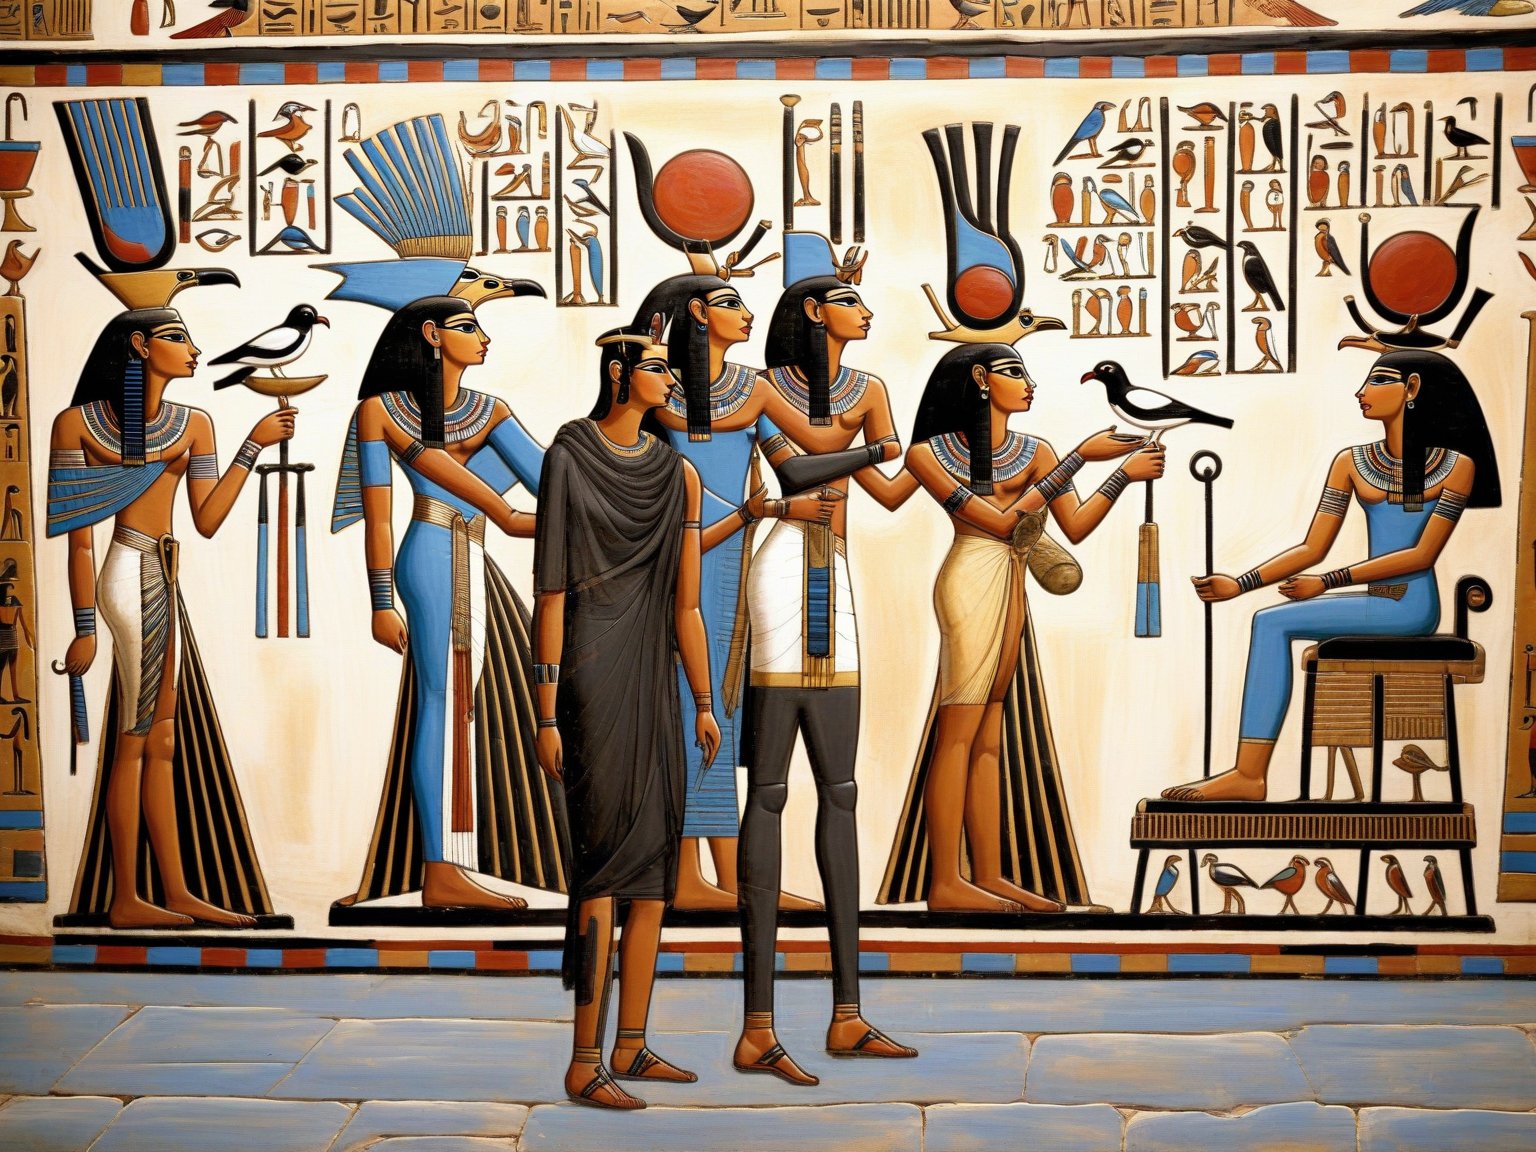 egyptian painting of a group of people with a bird, ancient egypt painting, ancient egypt art, egyptian art, ancient egyptian art, egyptian iconography, egyptian gods, egyptian symbolism, ancient egyptian mural, egyptian mythology, ancient egyptian, egyptian style, kemetic symbolism, egyptian setting, egyptian clothing, ancient egypt, egypt themed art, egyptian, hieroglyphic occult